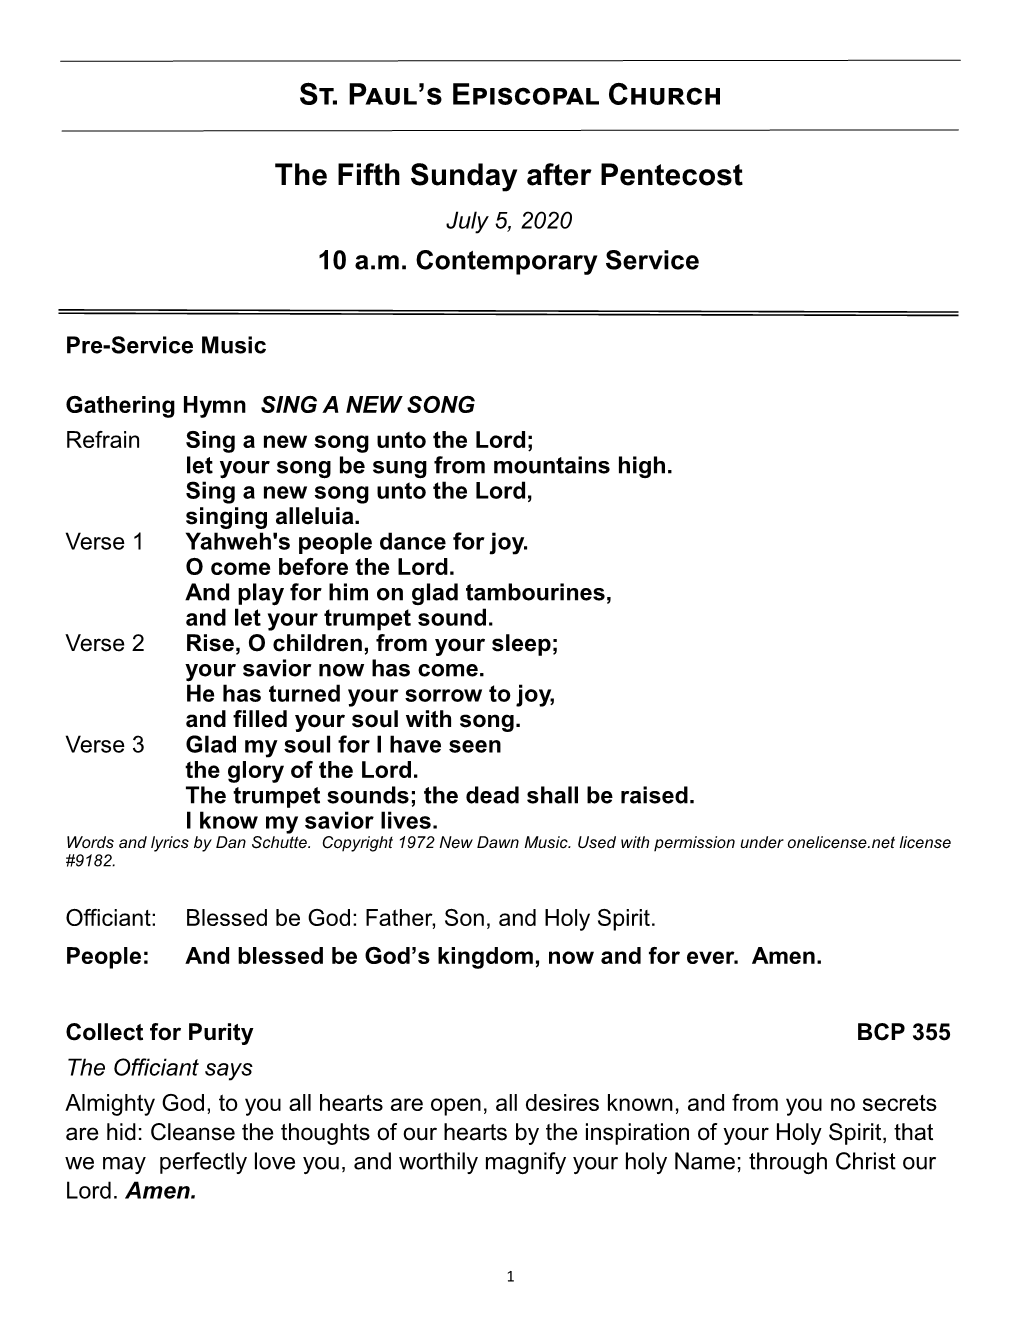 EC the Fifth Sunday After Pentecost